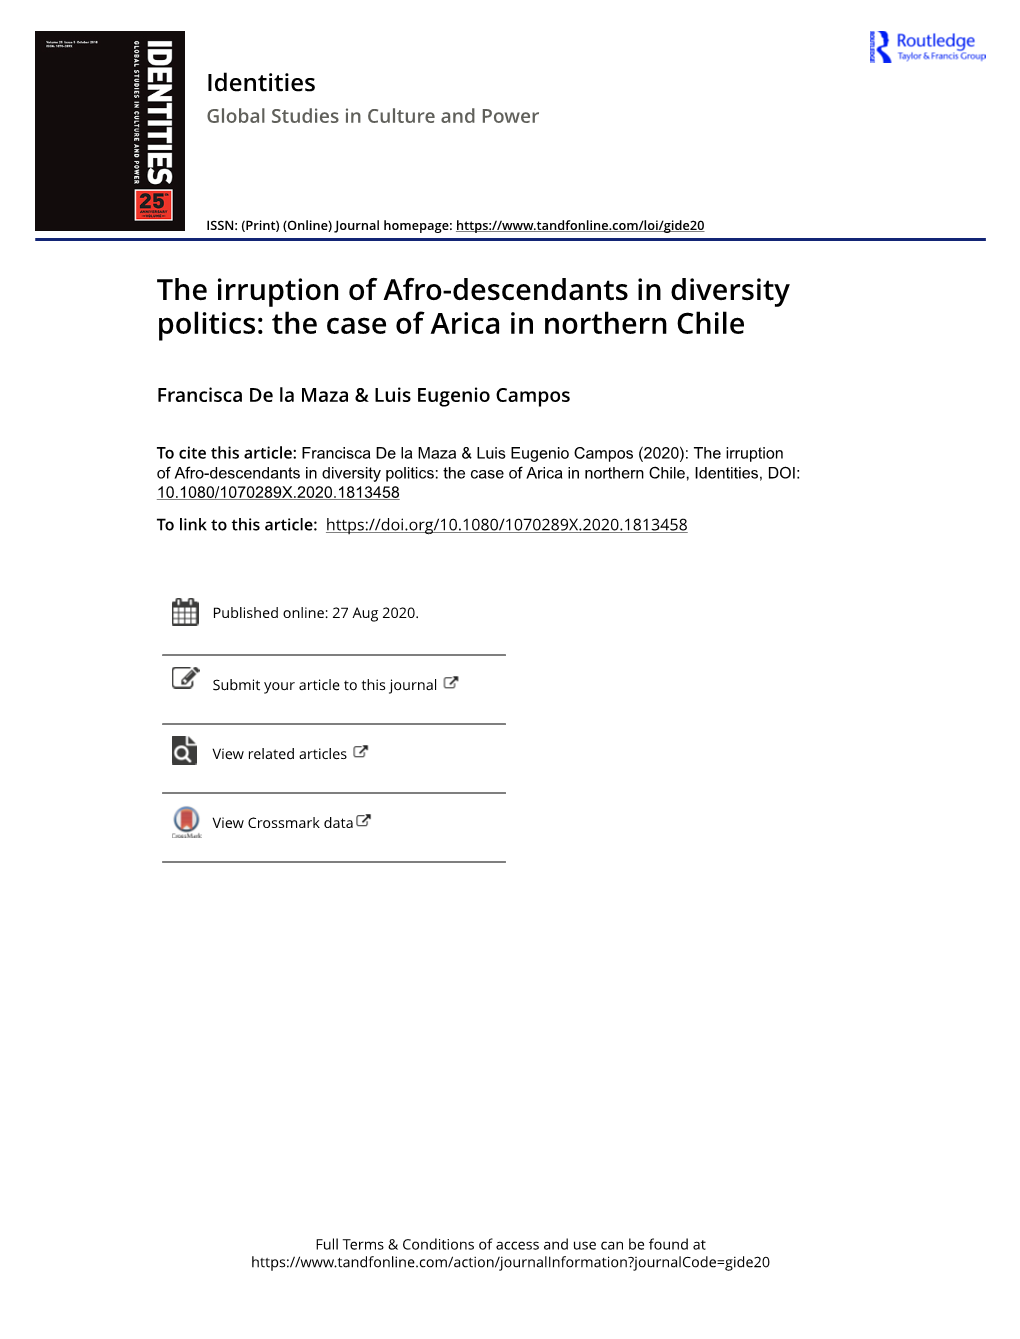 The Irruption of Afro-Descendants in Diversity Politics: the Case of Arica in Northern Chile